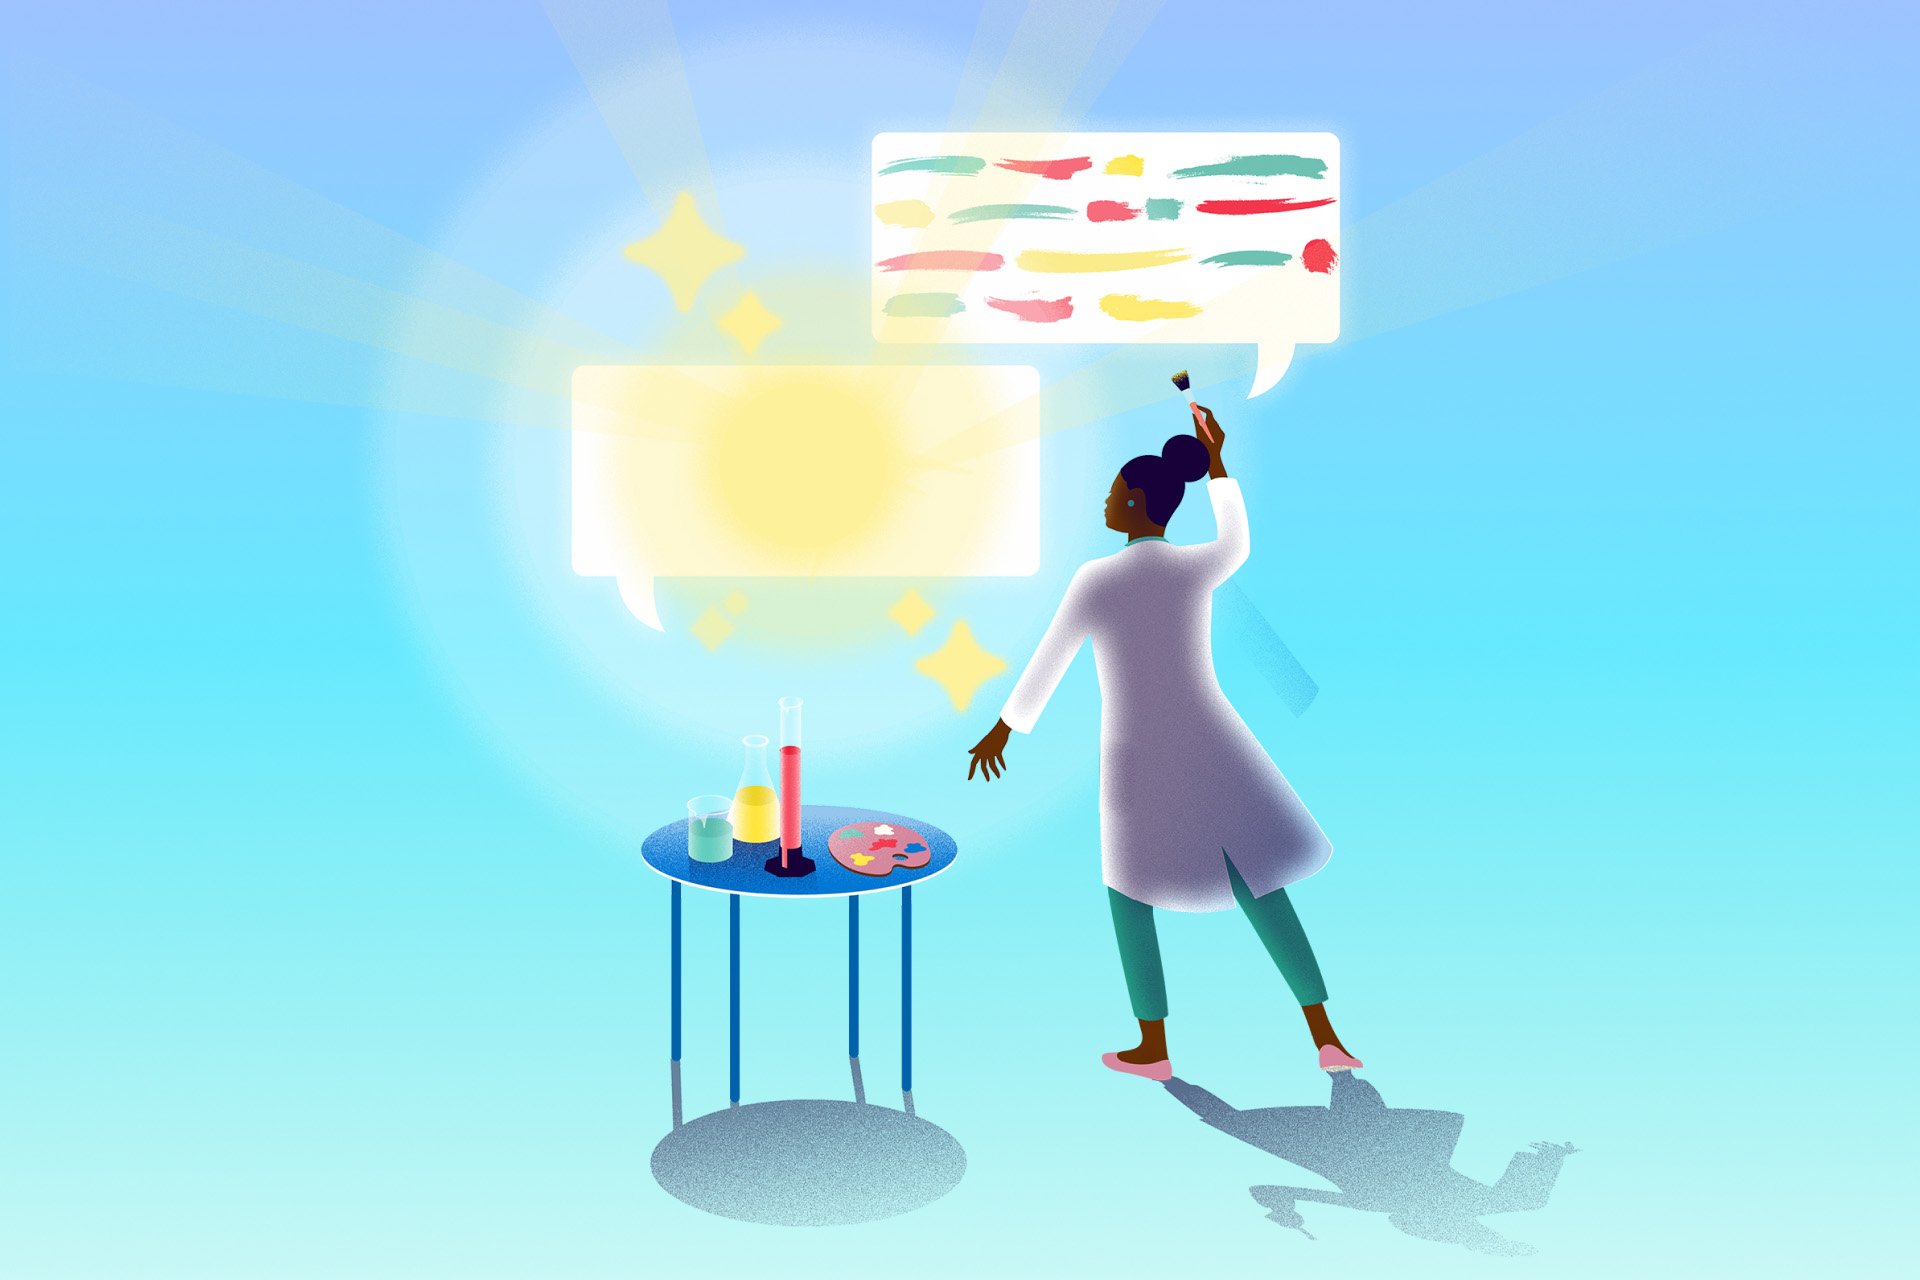 A colorful illustration of a woman in a smock using both artistic tools and scientific implements to create colorful brush strokes in a chat window. Below that window is a chat bubble featuring the Copilot “sparkle.”